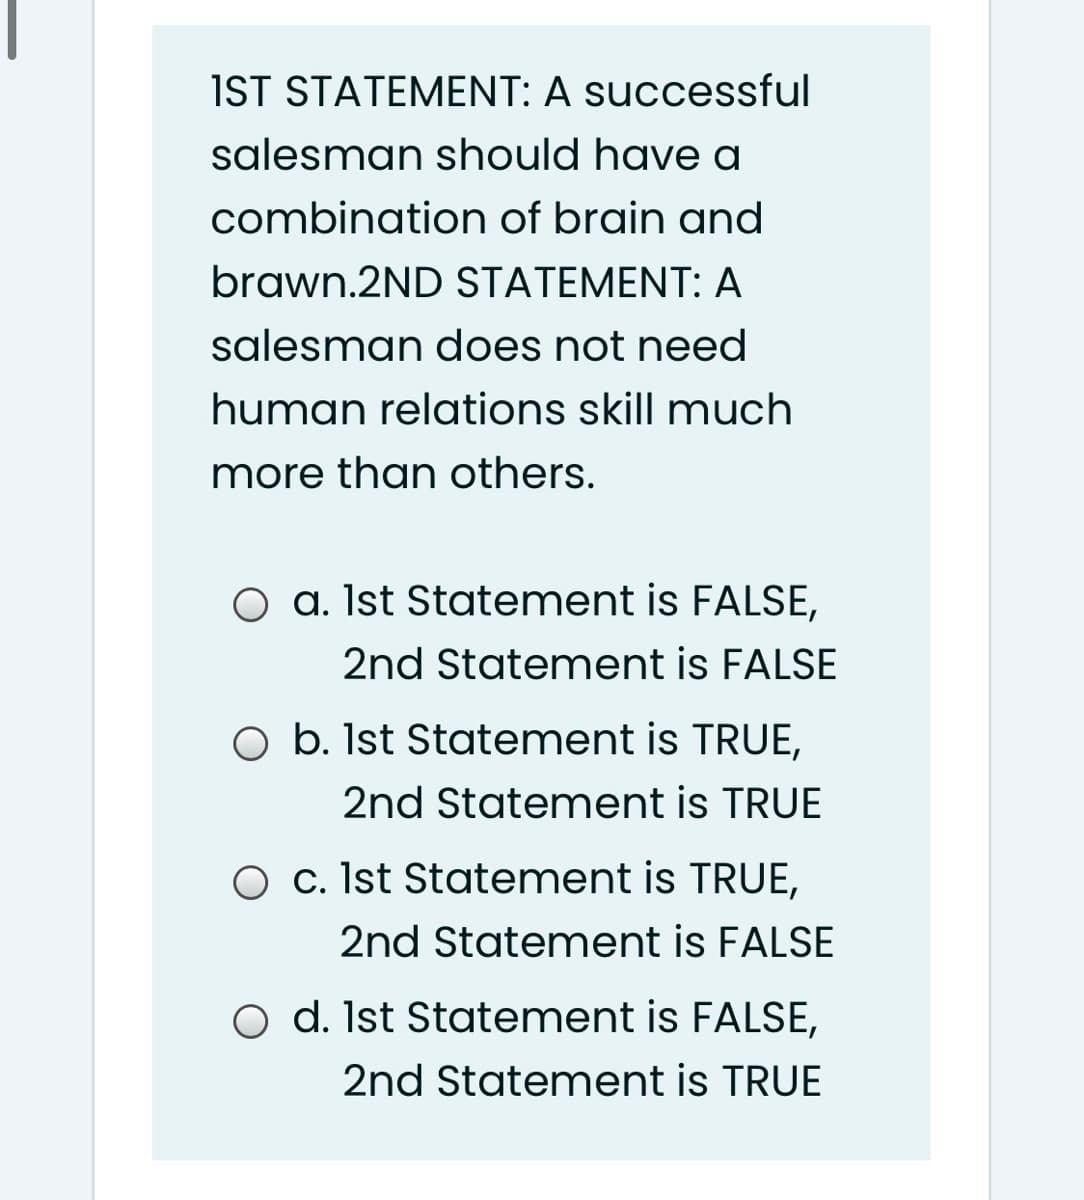 IST STATEMENT: A successful
salesman should have a
combination of brain and
brawn.2ND STATEMENT: A
salesman does not need
human relations skill much
more than others.
O a. Ist Statement is FALSE,
2nd Statement is FALSE
O b. Ist Statement is TRUE,
2nd Statement is TRUE
O c. Ist Statement is TRUE,
2nd Statement is FALSE
O d. Ist Statement is FALSE,
2nd Statement is TRUE
